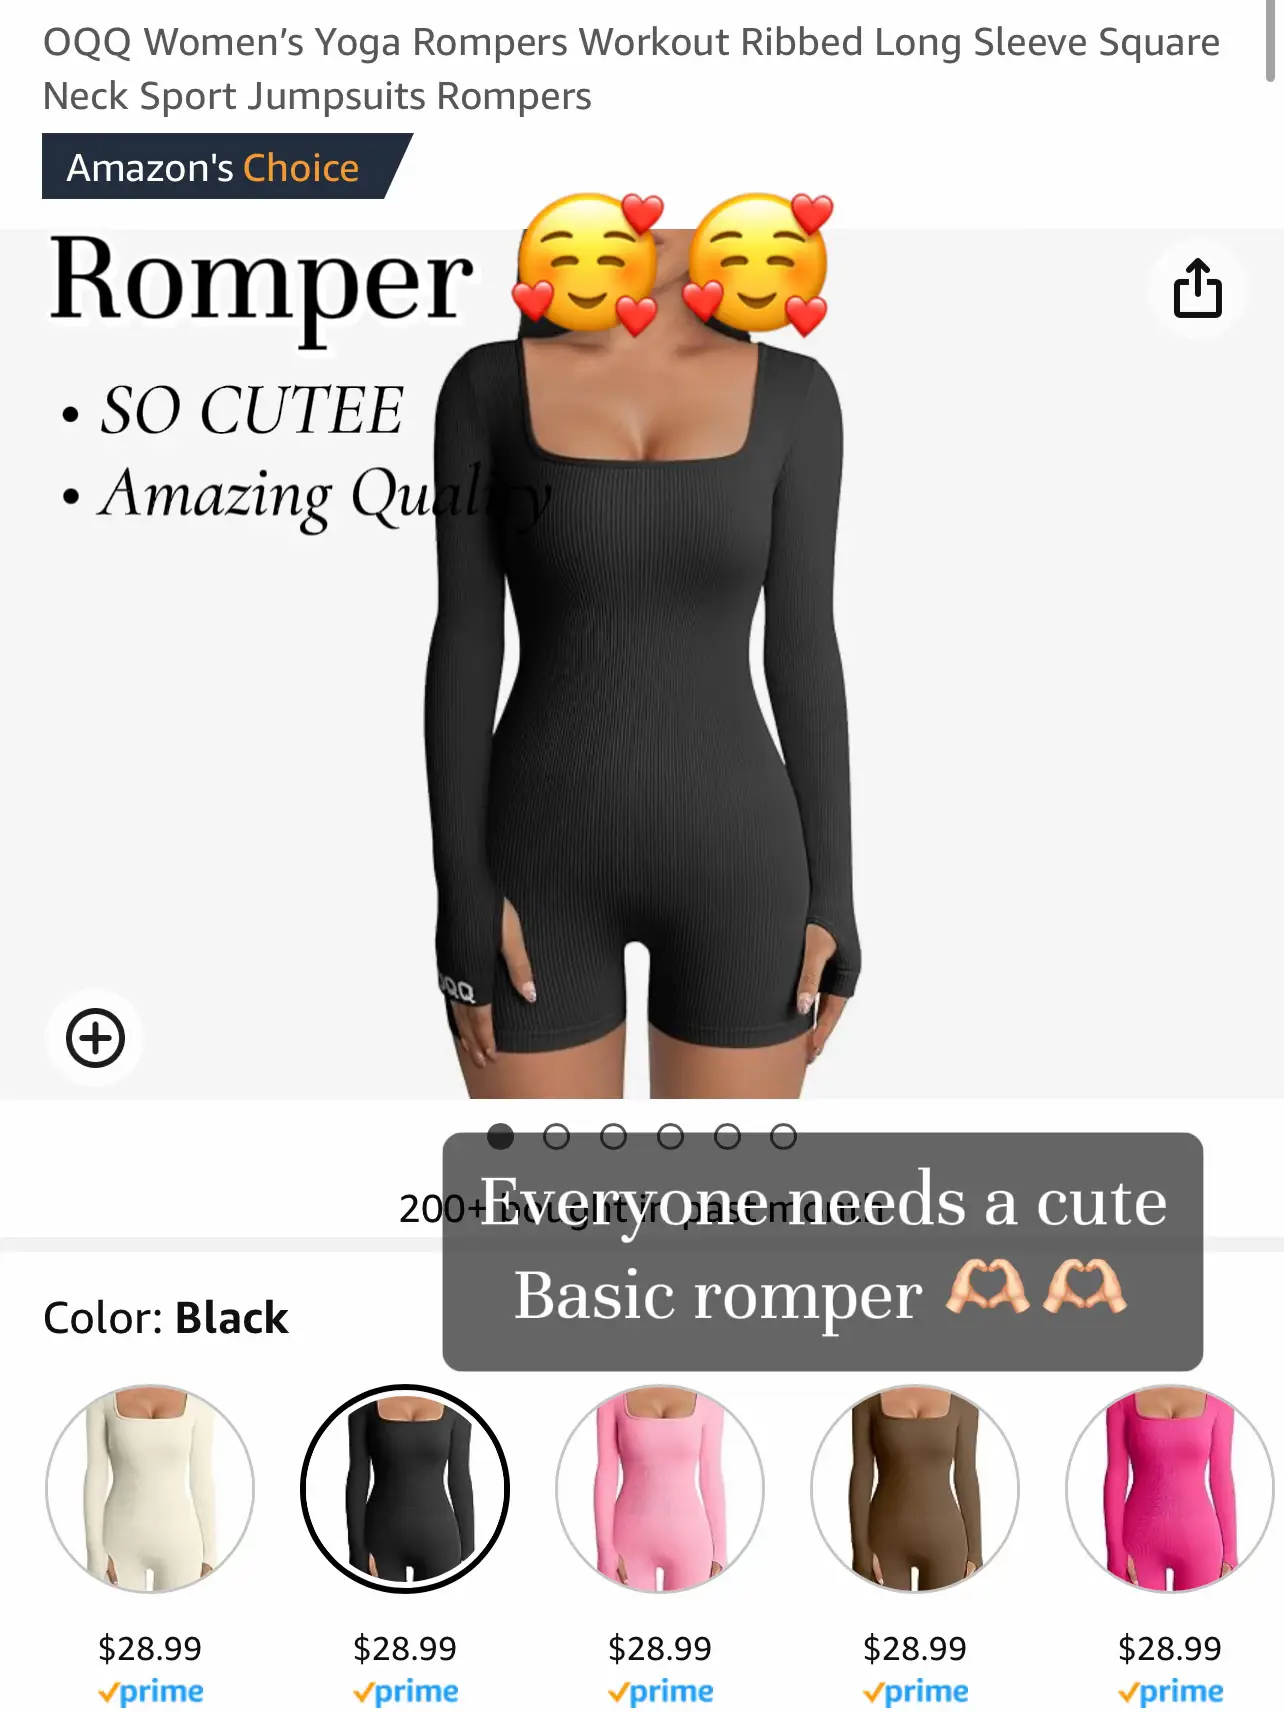 Unitard Romper for Women 1 Piece Yoga Rompers Workout Ribbed Square Neck  Sport Jumpsuits Boyshorts Surf Sport